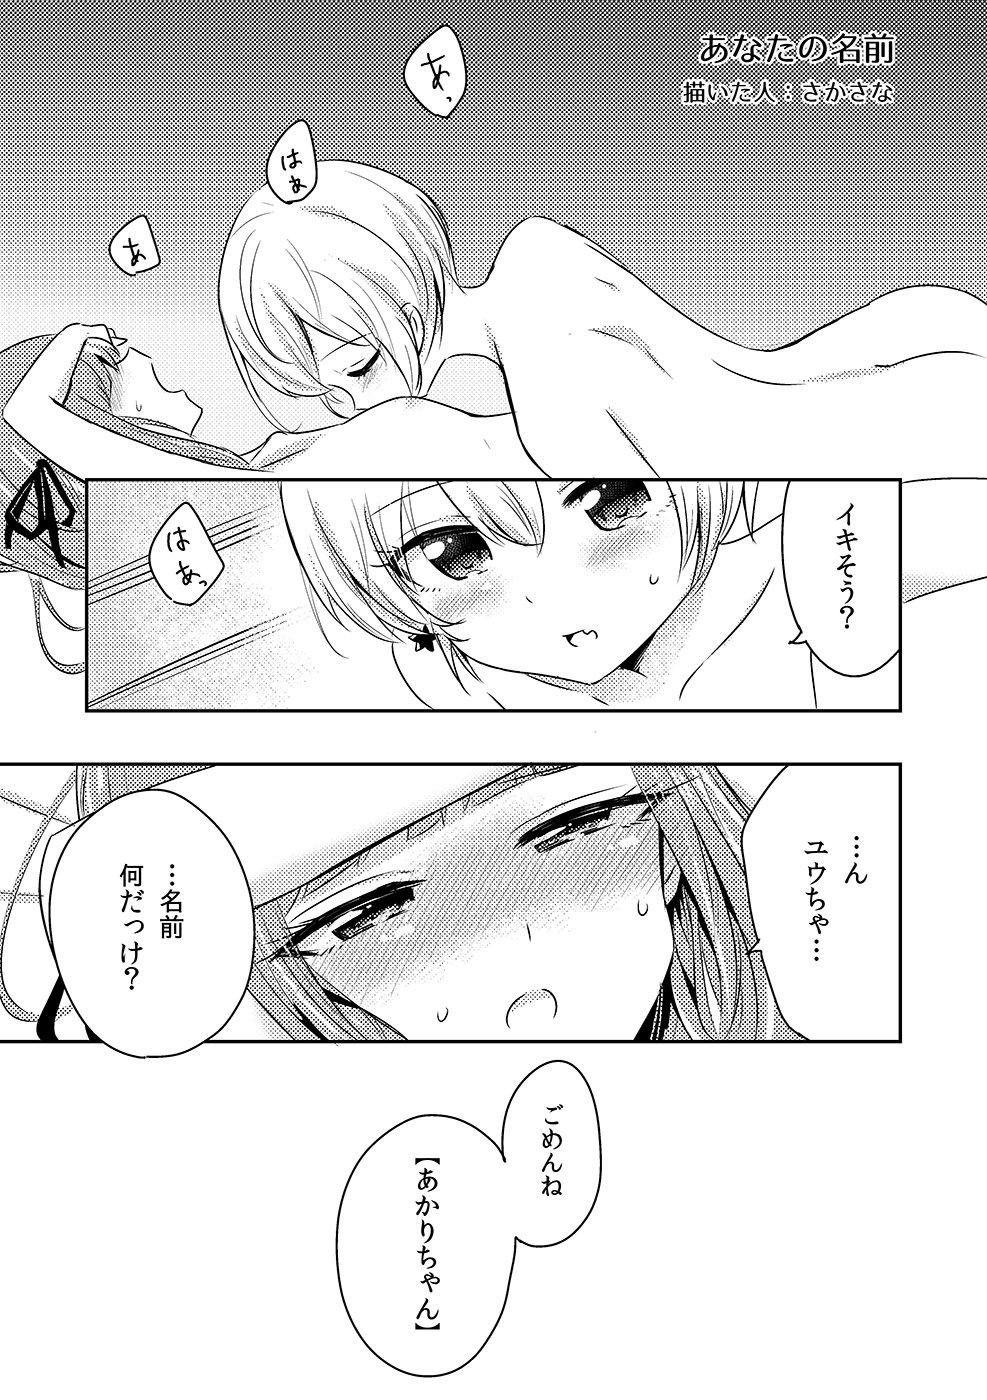 Large Who contributed to loveless sex joint two years ago! Yuusumi manga. - Aikatsu Whores - Picture 1